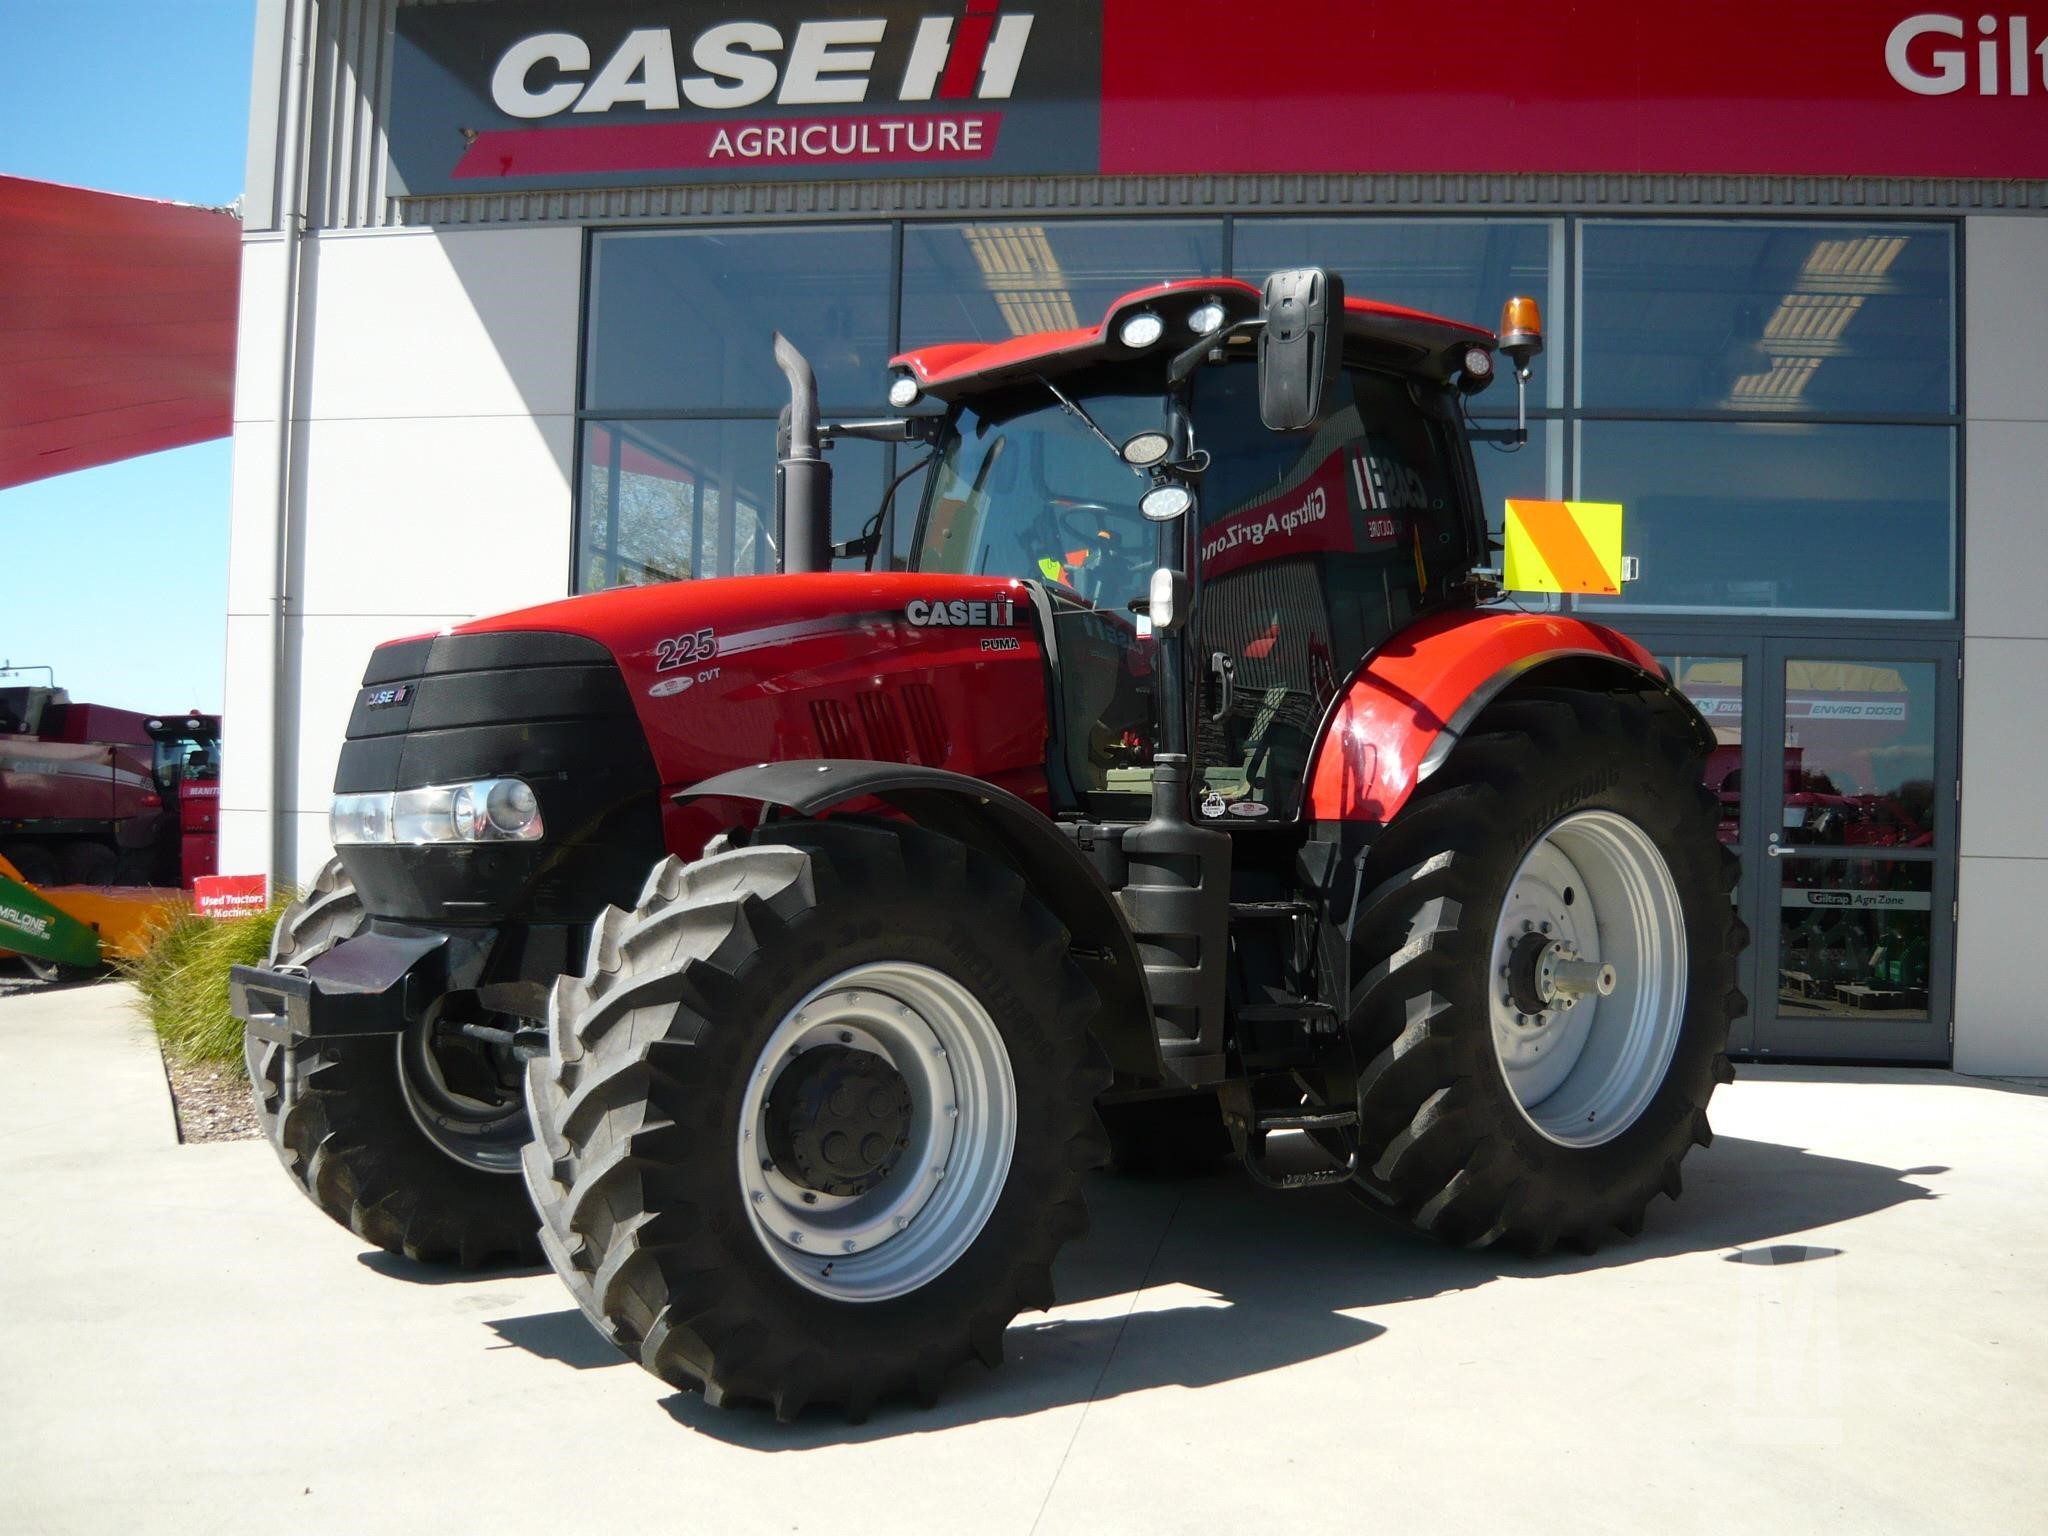 CASE IH PUMA 225 CVT For Sale 2 Listings | - PAGE 1 of 1